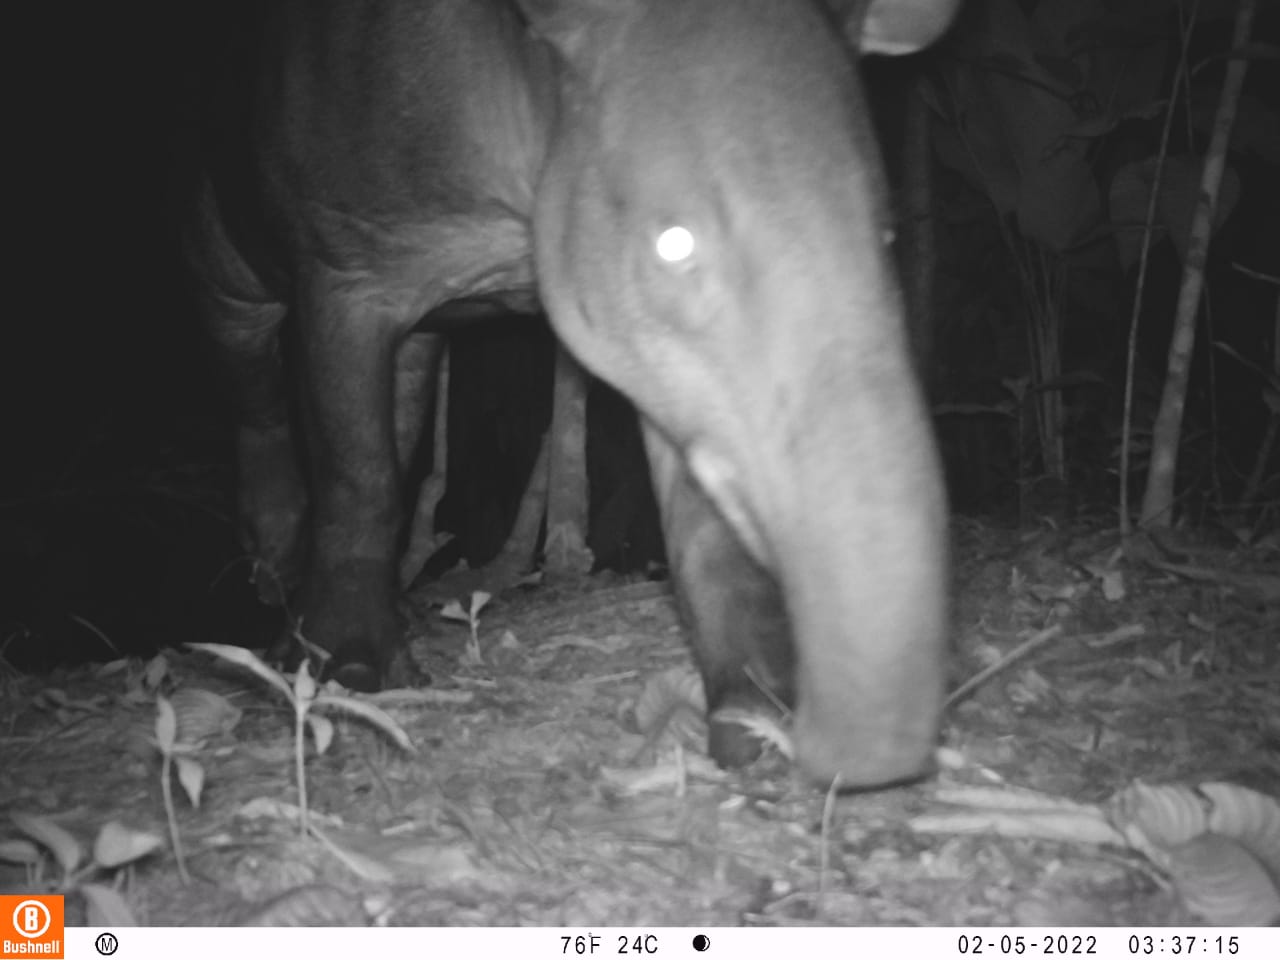 A tapir captured in a photo at night